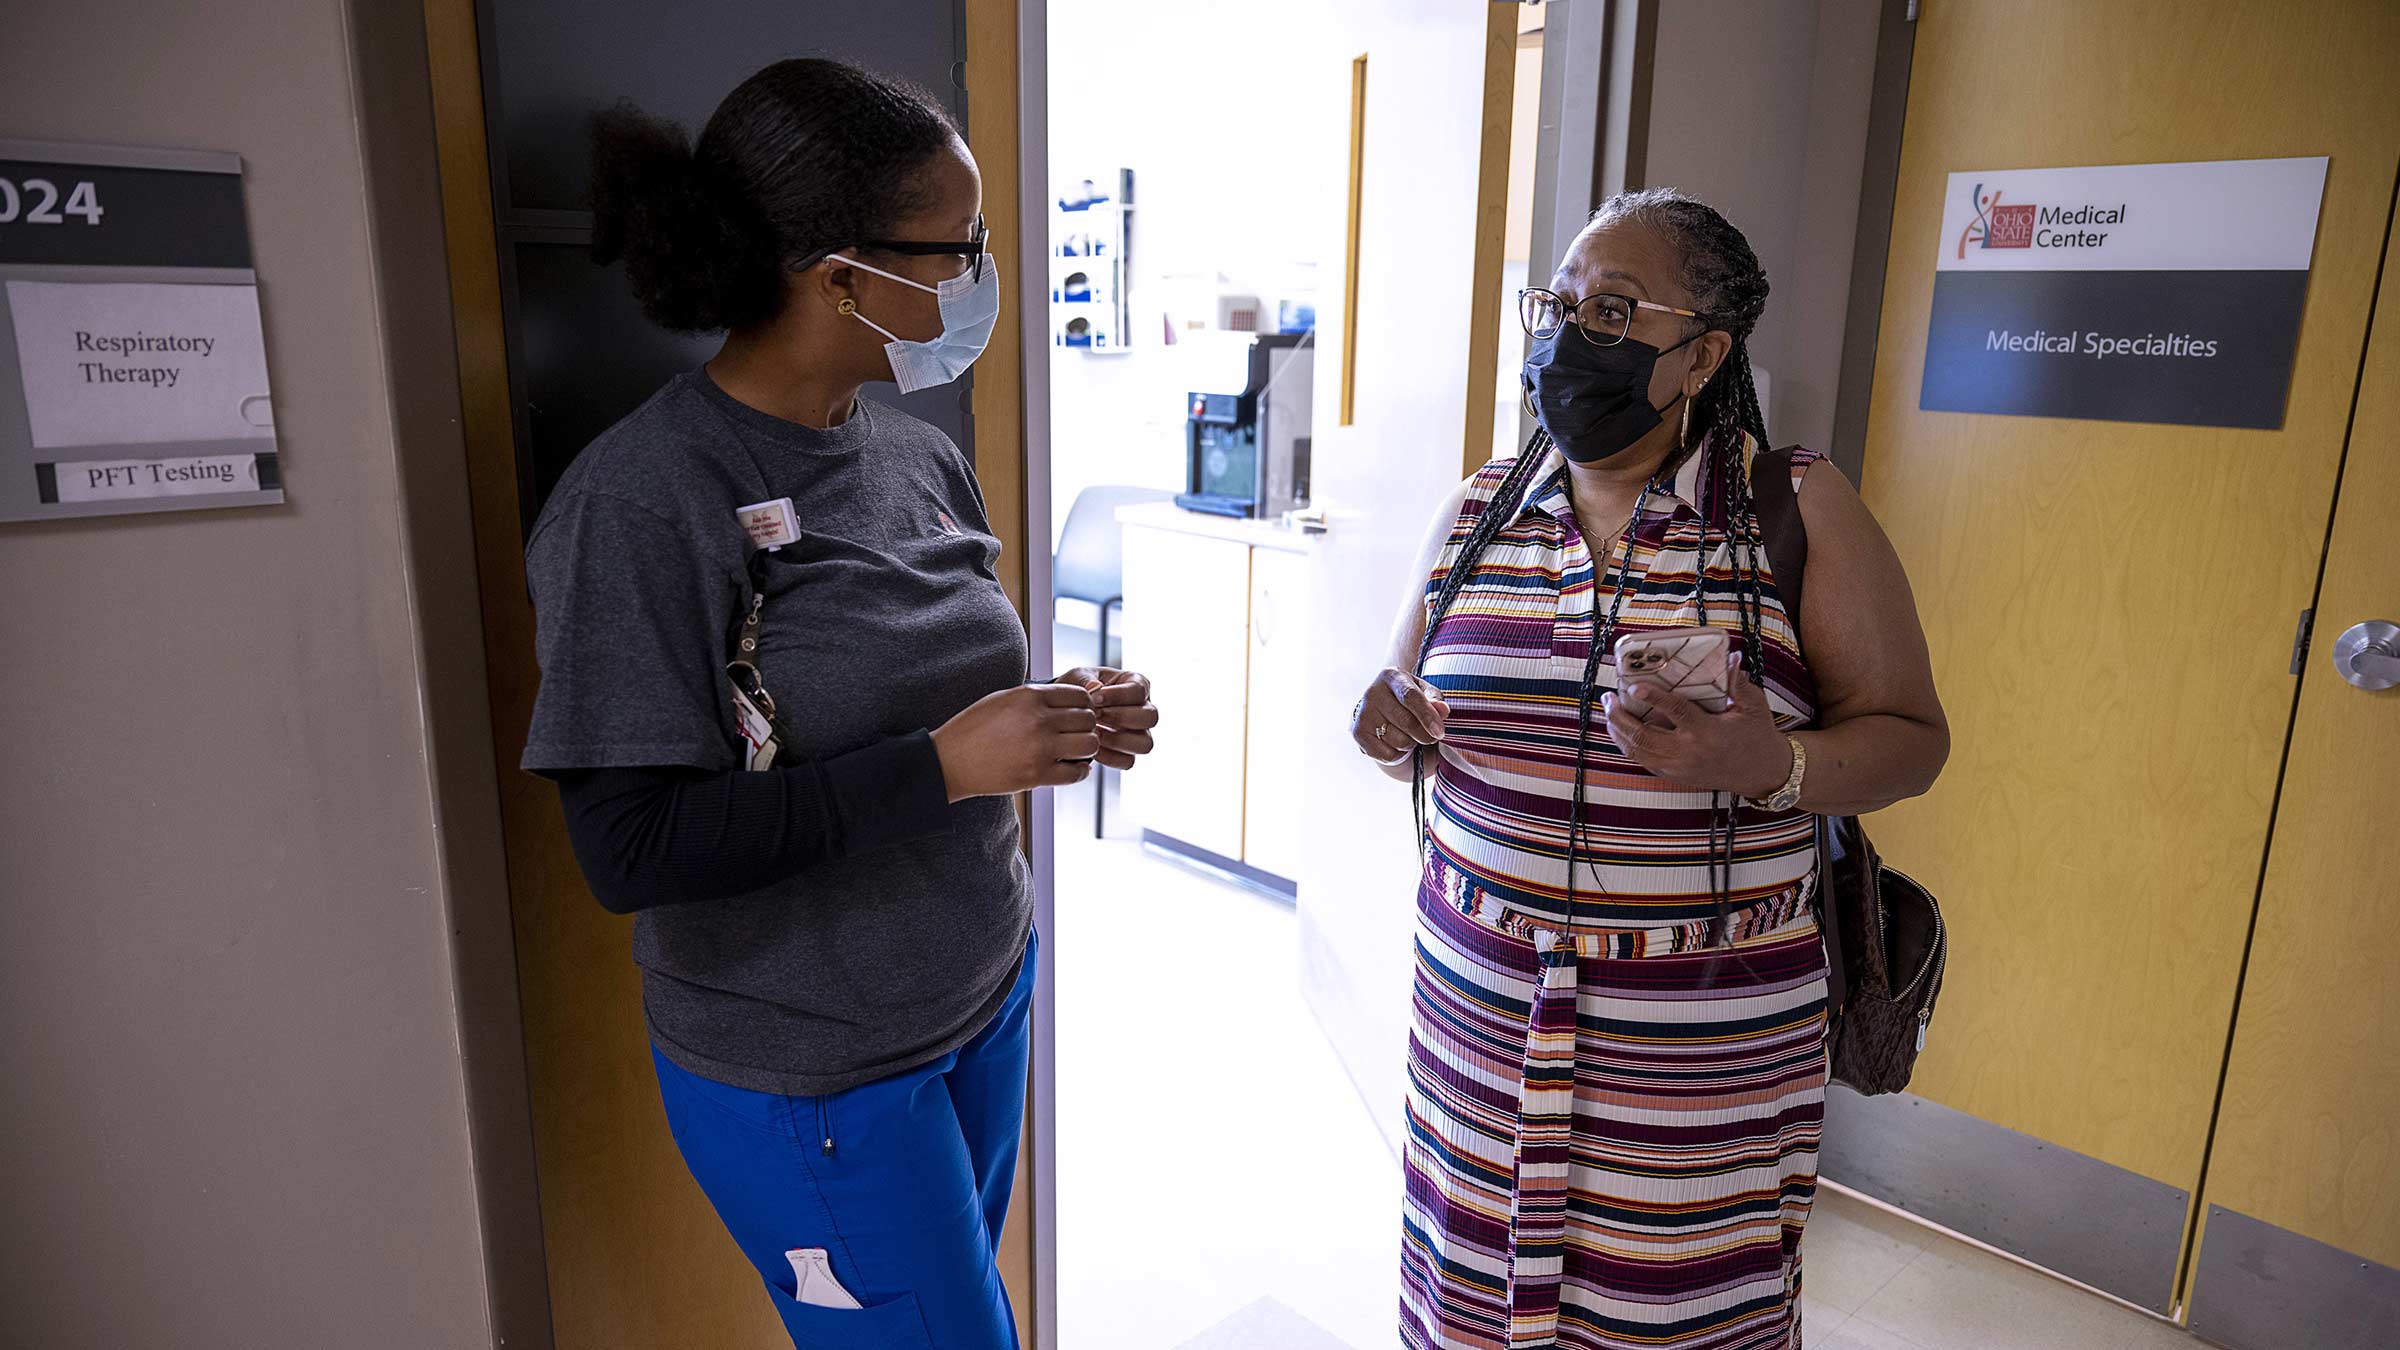 April Muldrow talks with medical staff member outside of respiratory therapy